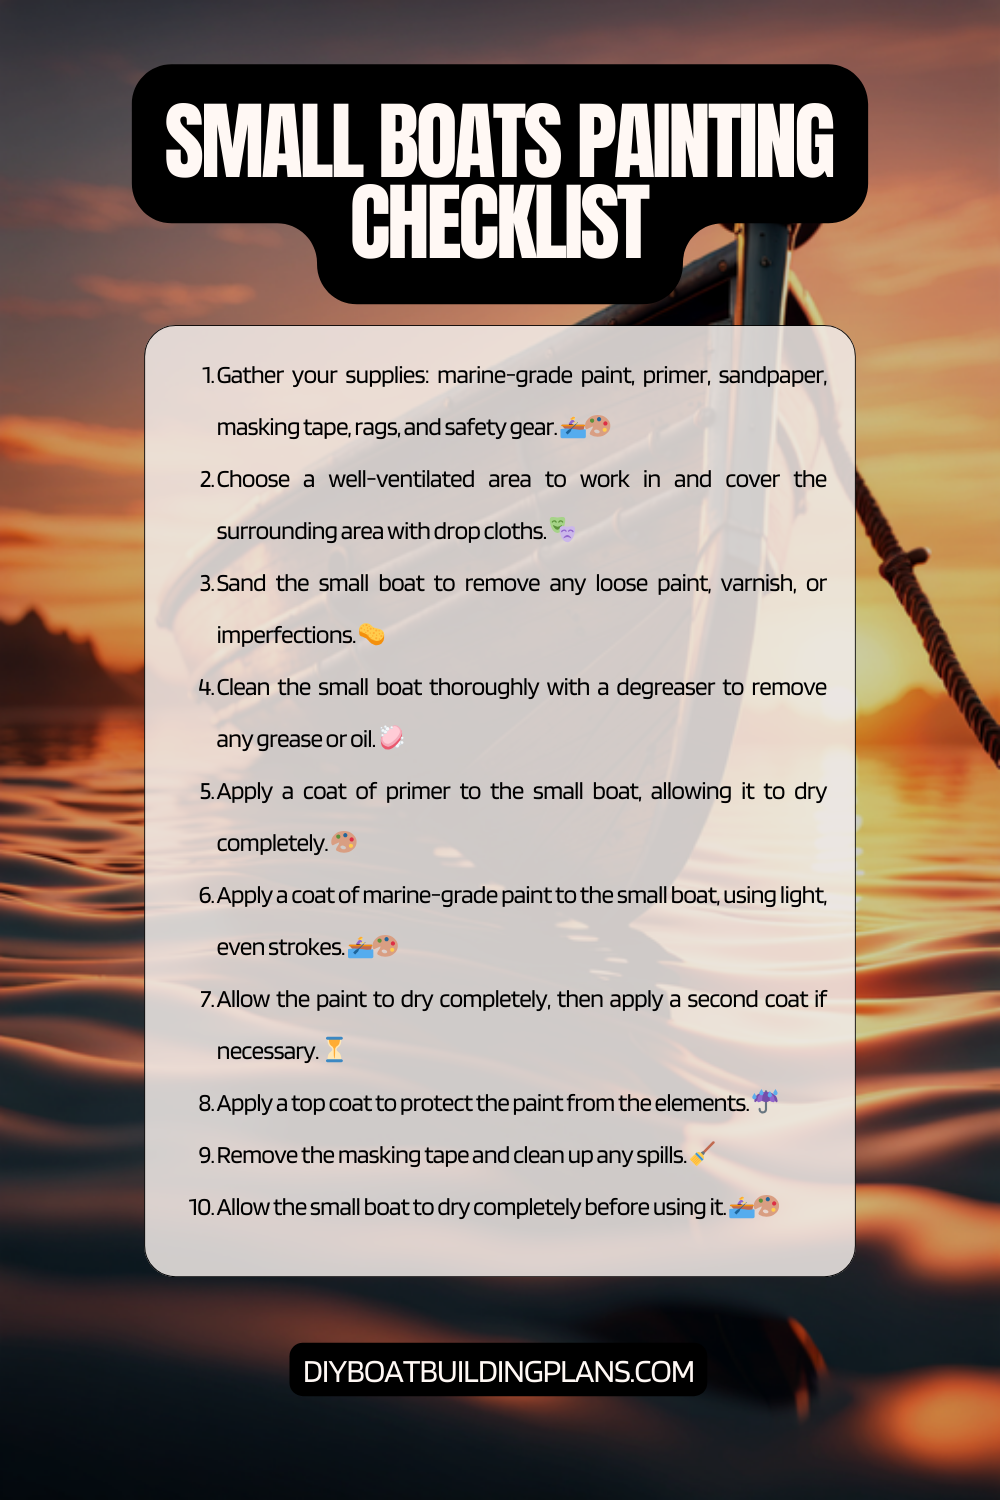 Small Boat Painting Checklist